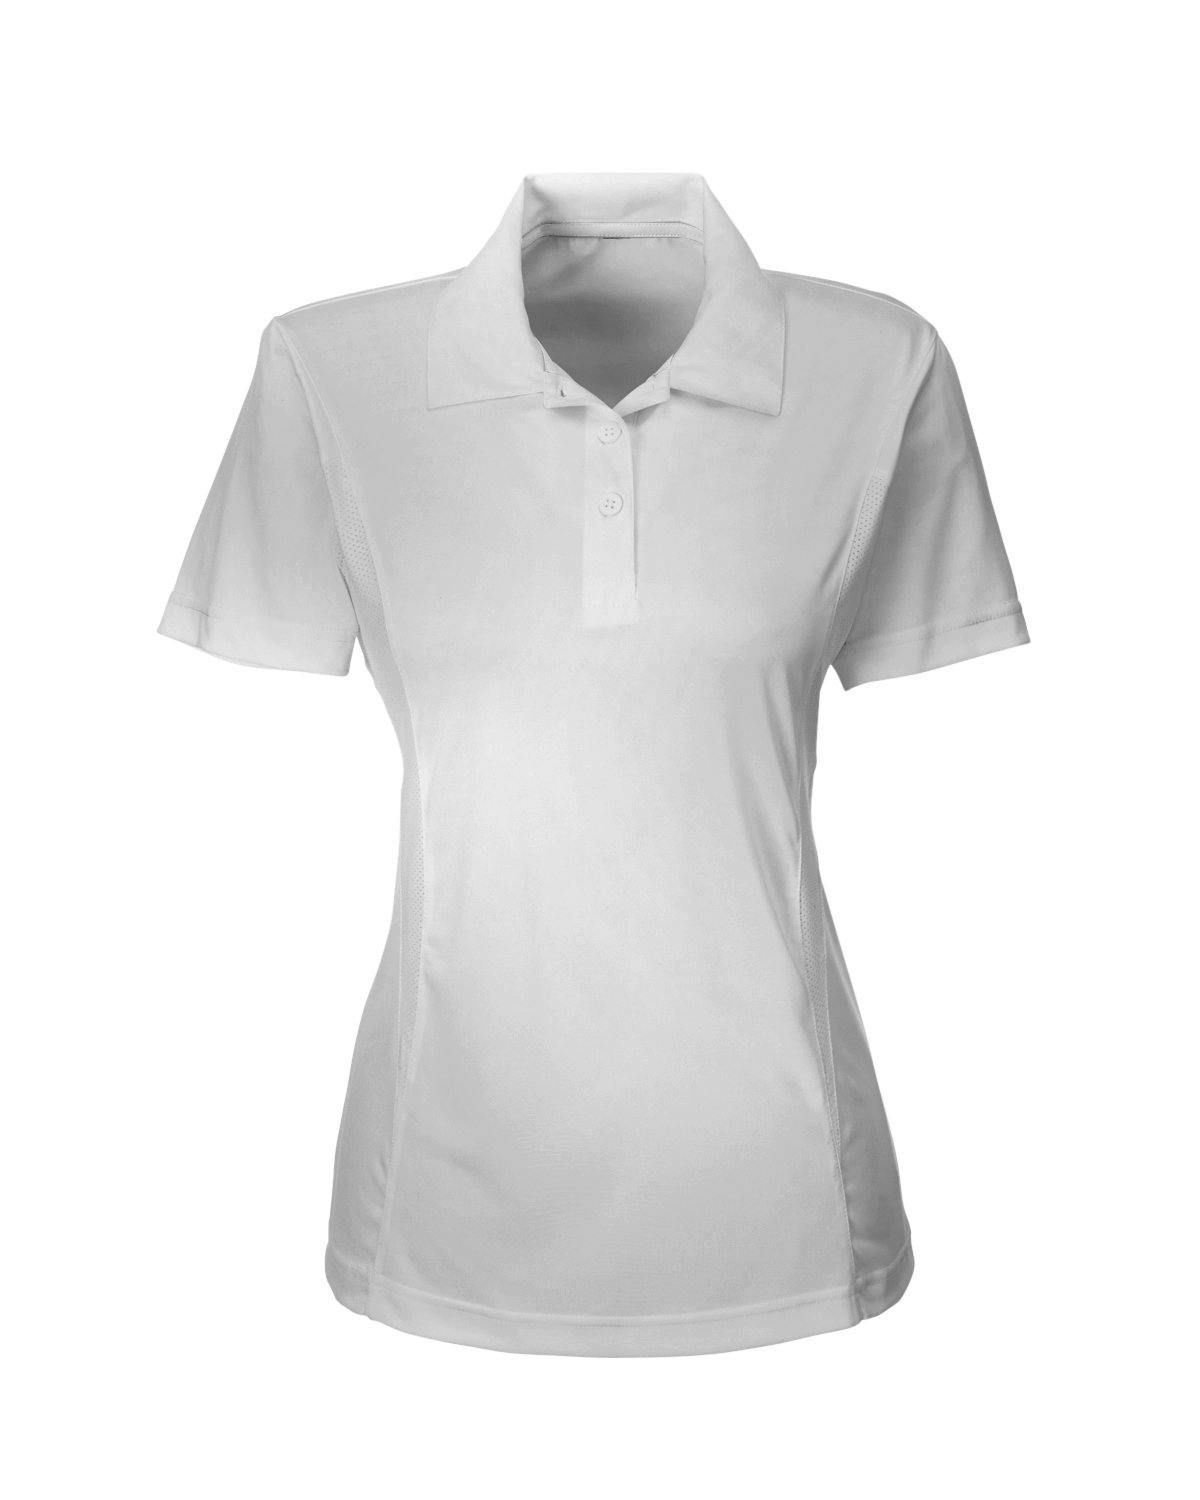 Image for Ladies' Charger Performance Polo